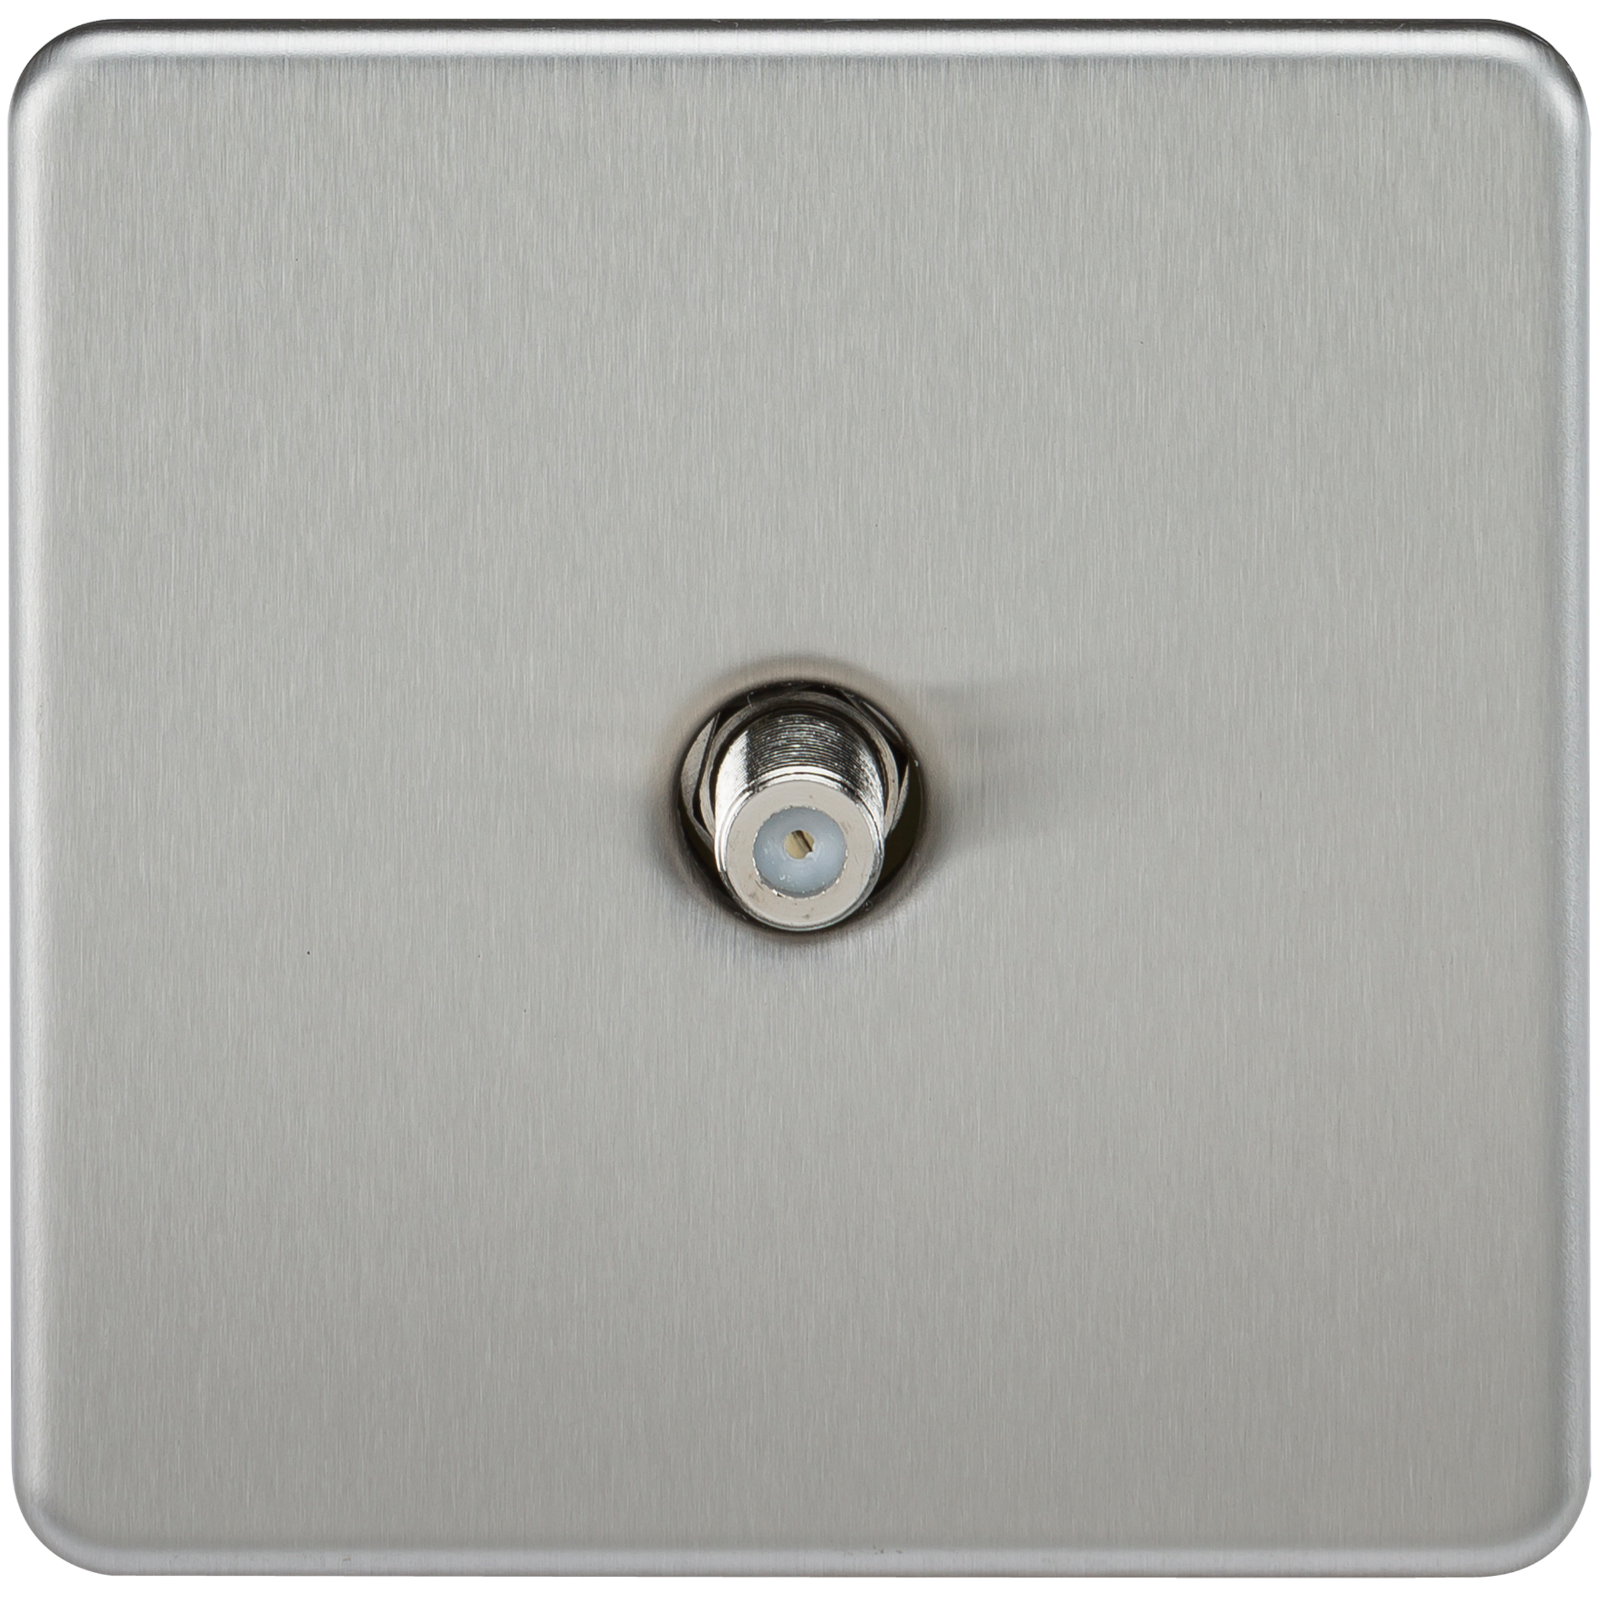 Screwless 1G SAT TV Outlet (Non-Isolated) - Brushed Chrome - SF0150BC 